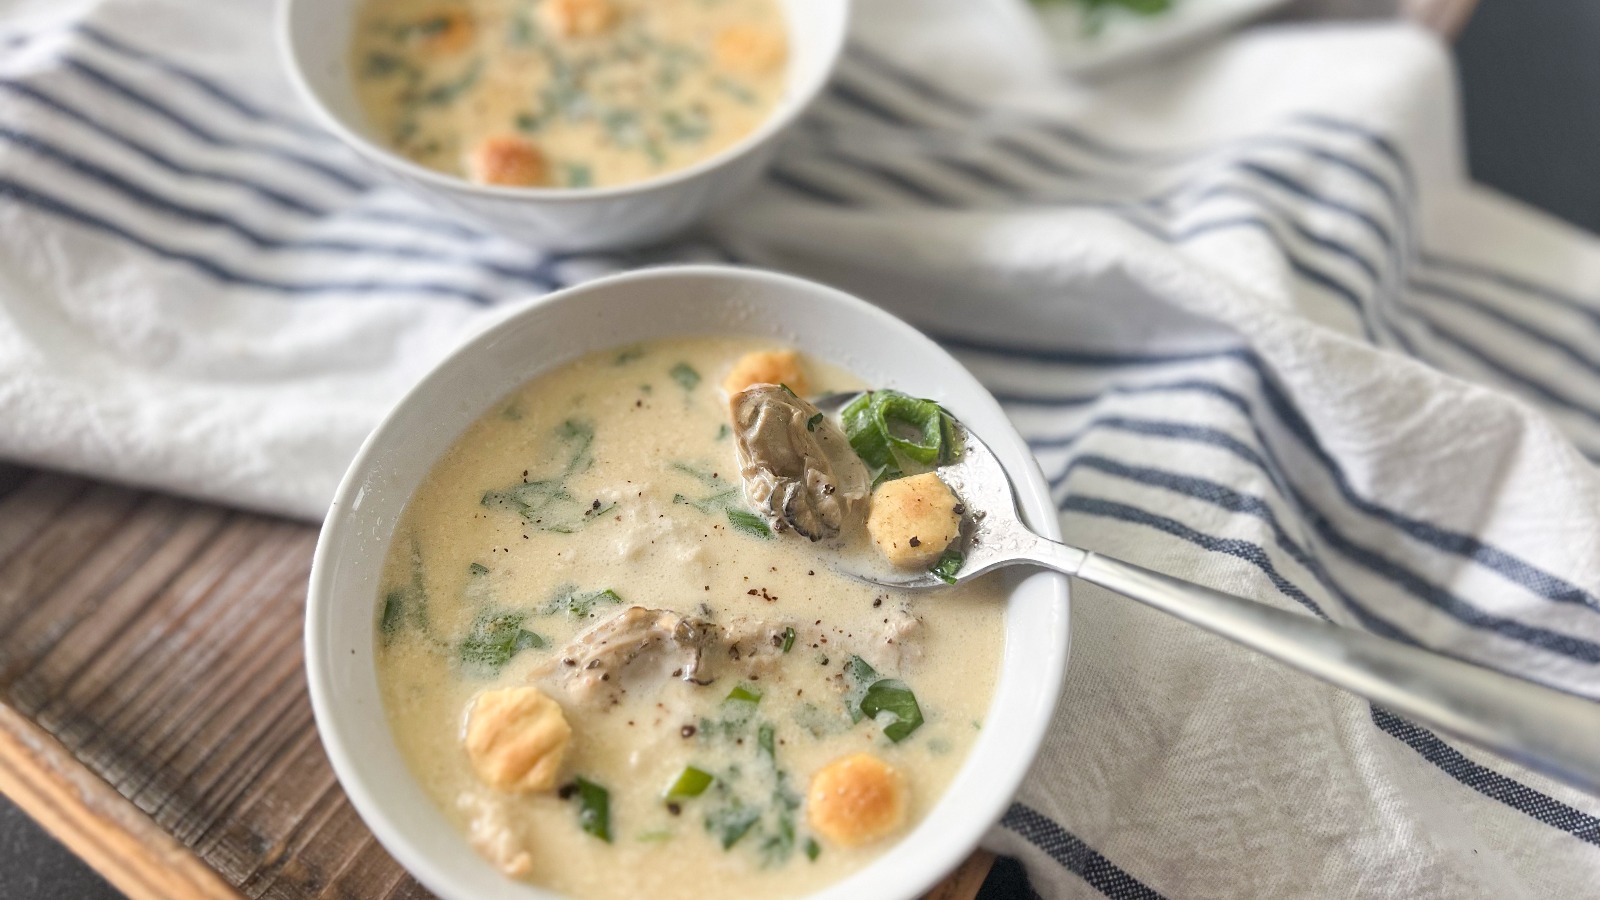 https://www.mashed.com/img/gallery/virginia-oyster-stew-recipe/l-intro-1687794397.jpg